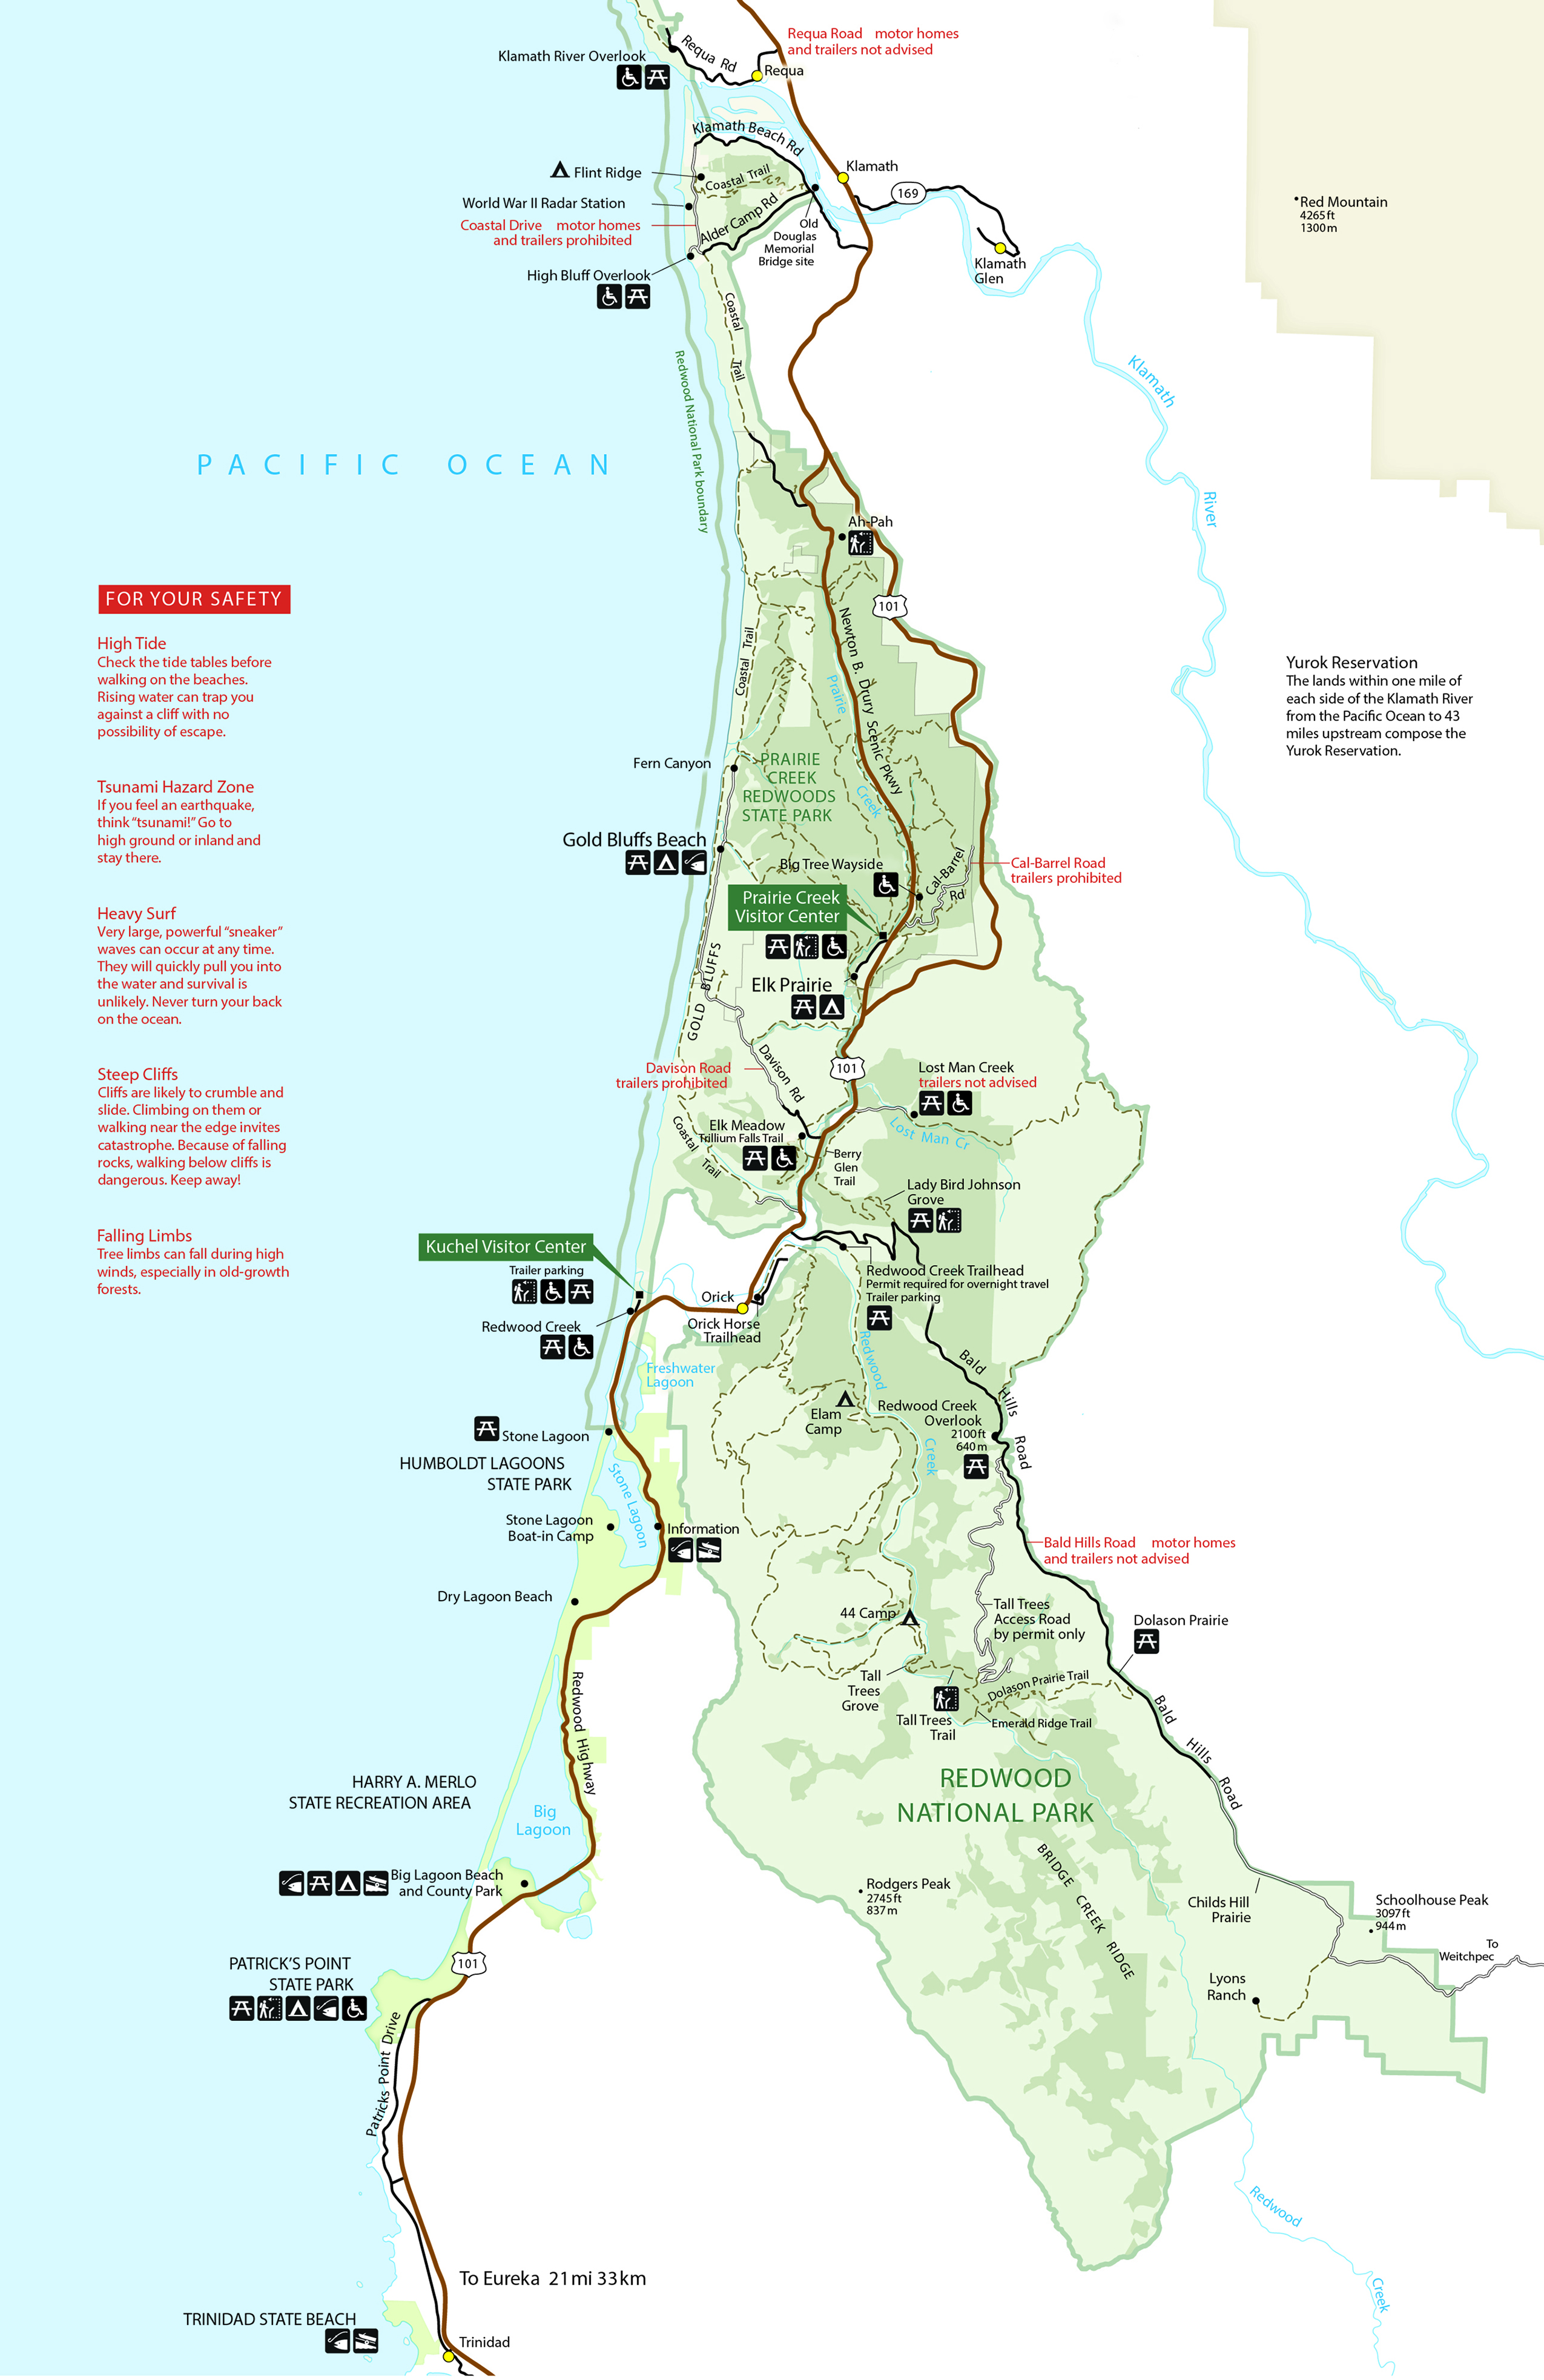 Redwood Trees In California Map Maps   Redwood National and State Parks (U.S. National Park Service)